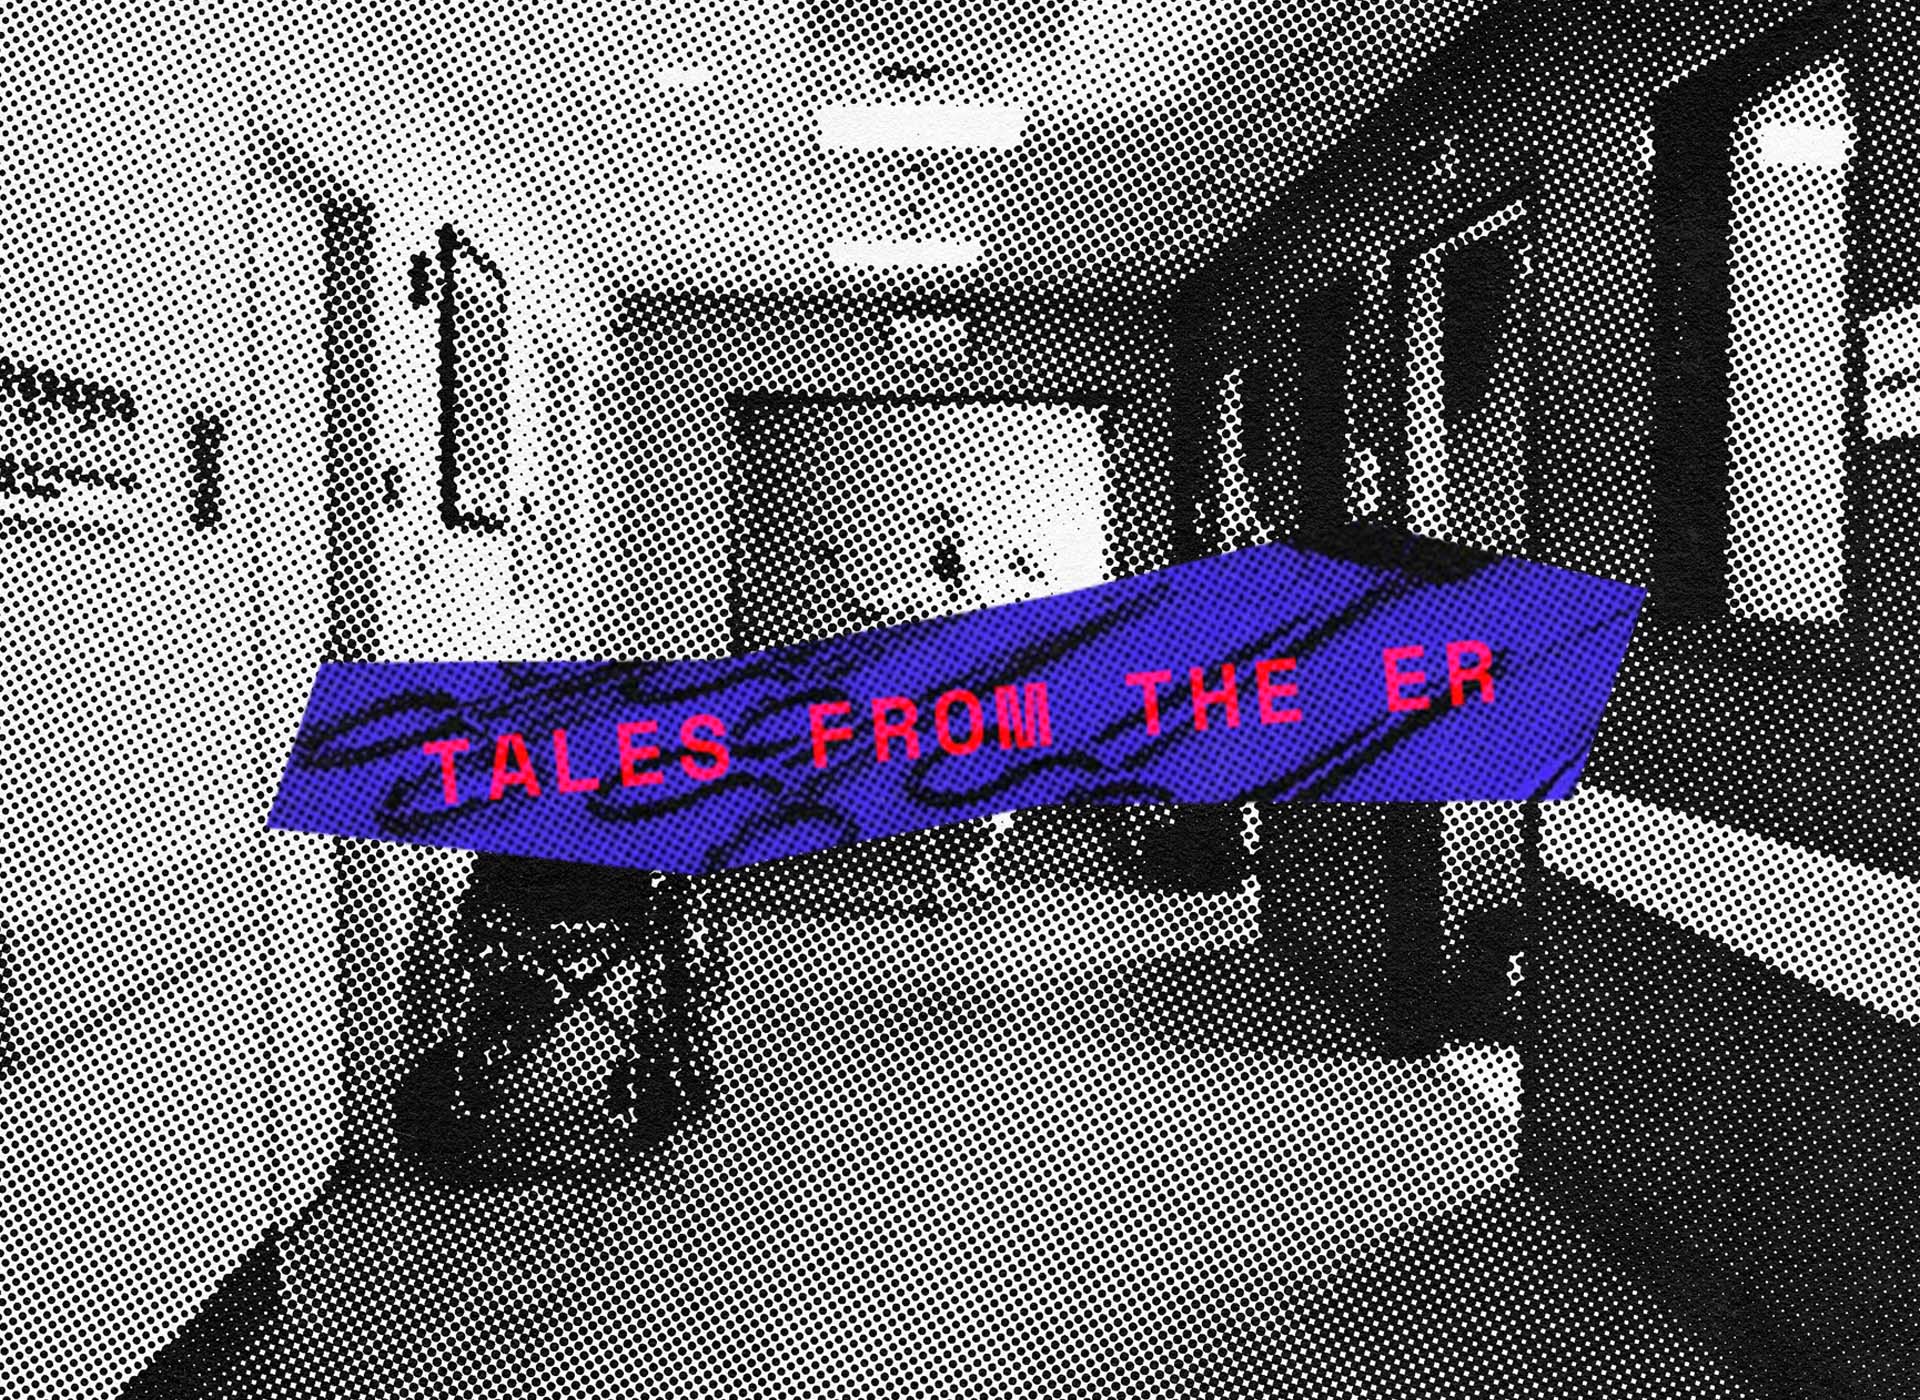 Tales from the ER #2